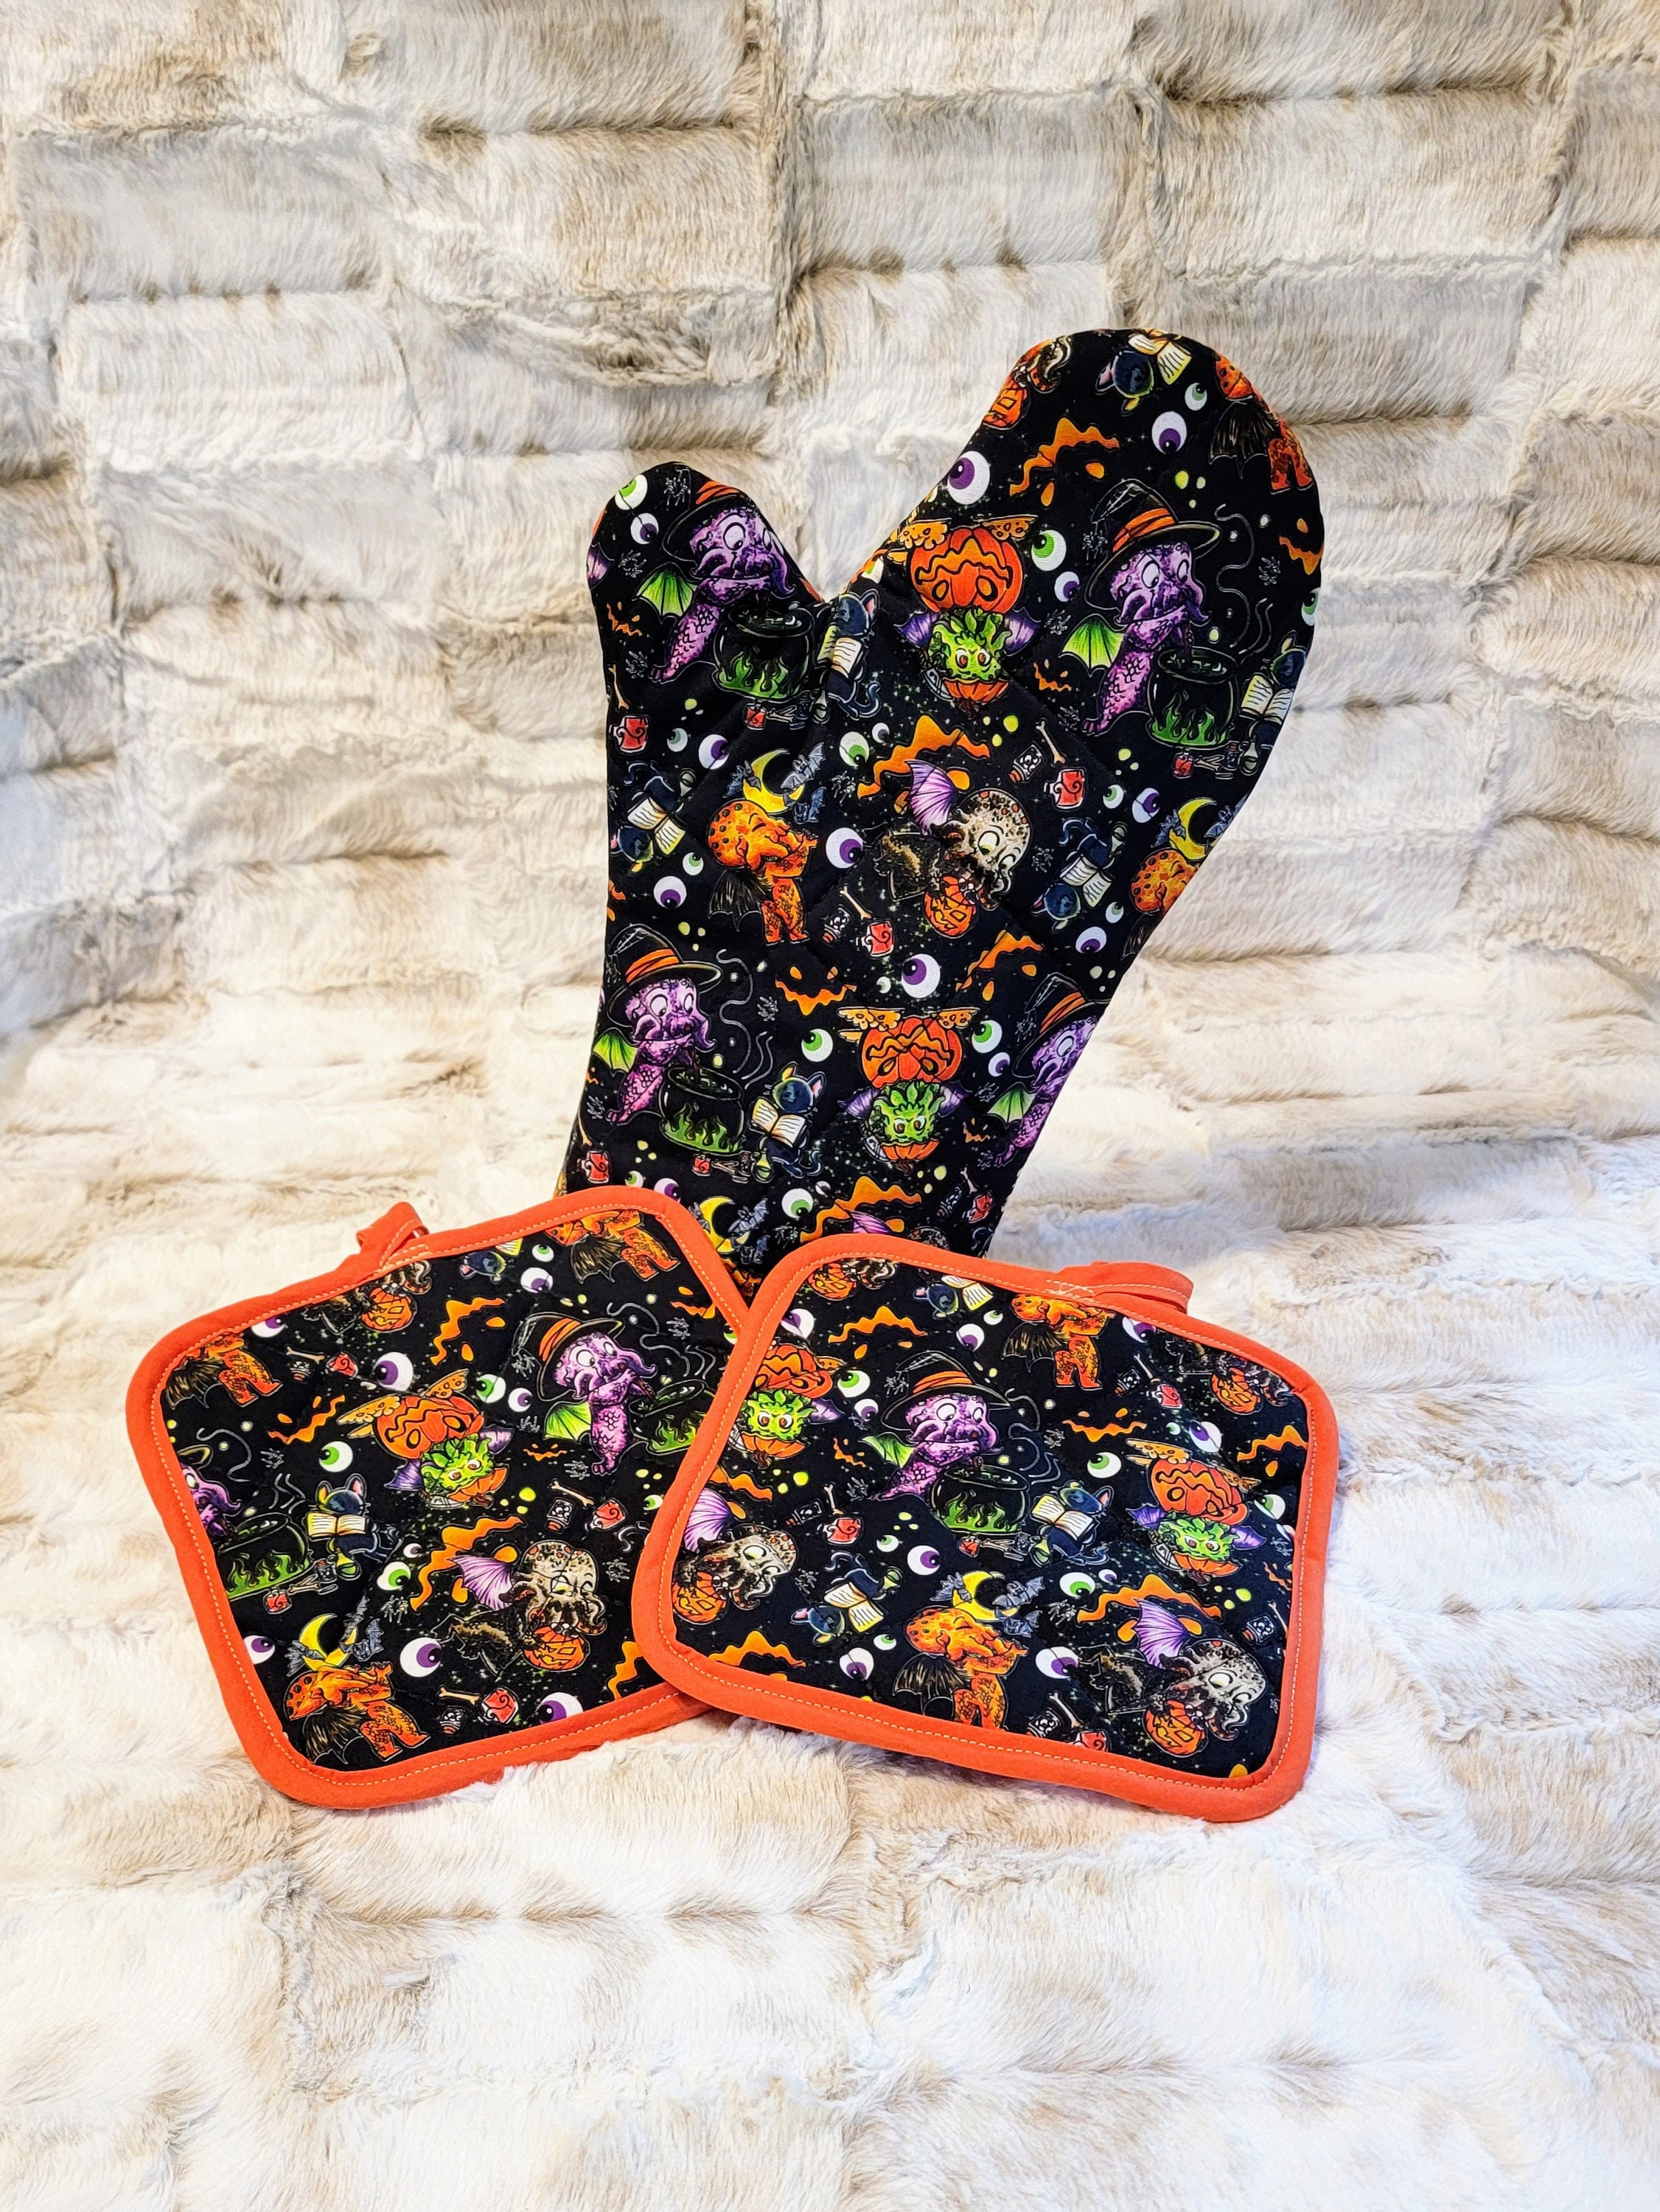 DouZhe Oven Mitts and Pot Holders Sets, Cute Animal Lizard Prints